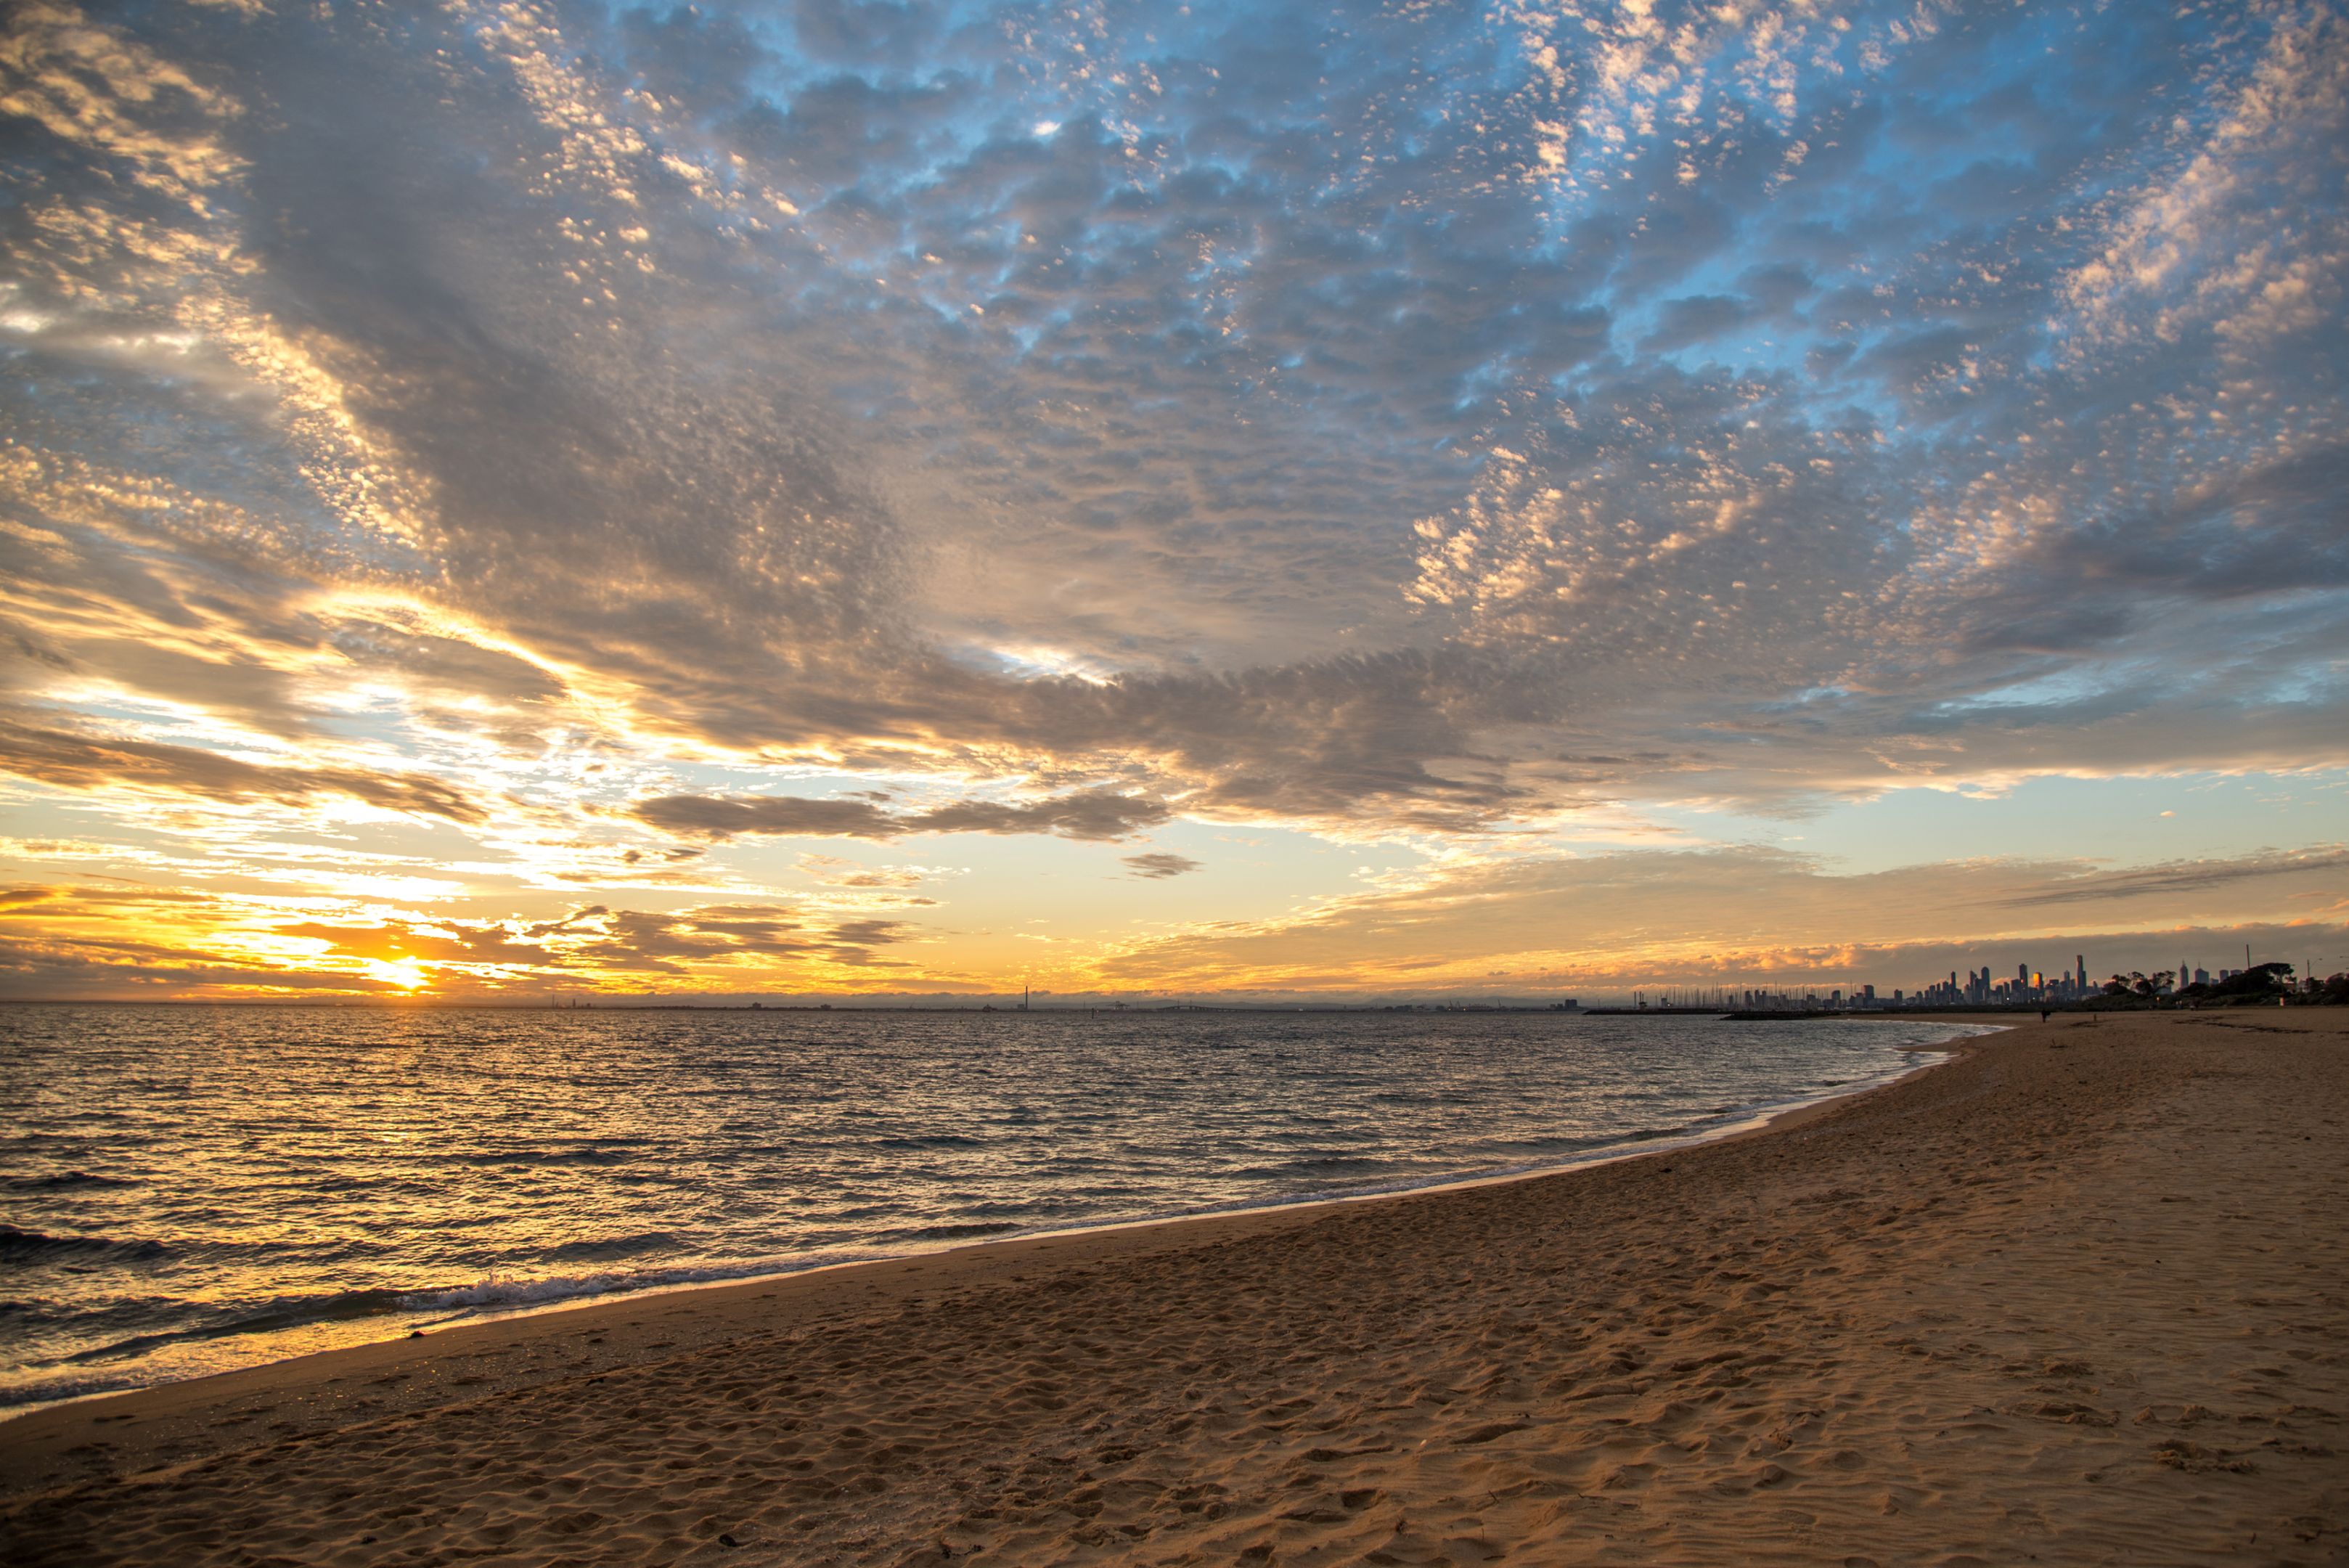 Sunset at Brighton Beach, Melbourne with the city in the background